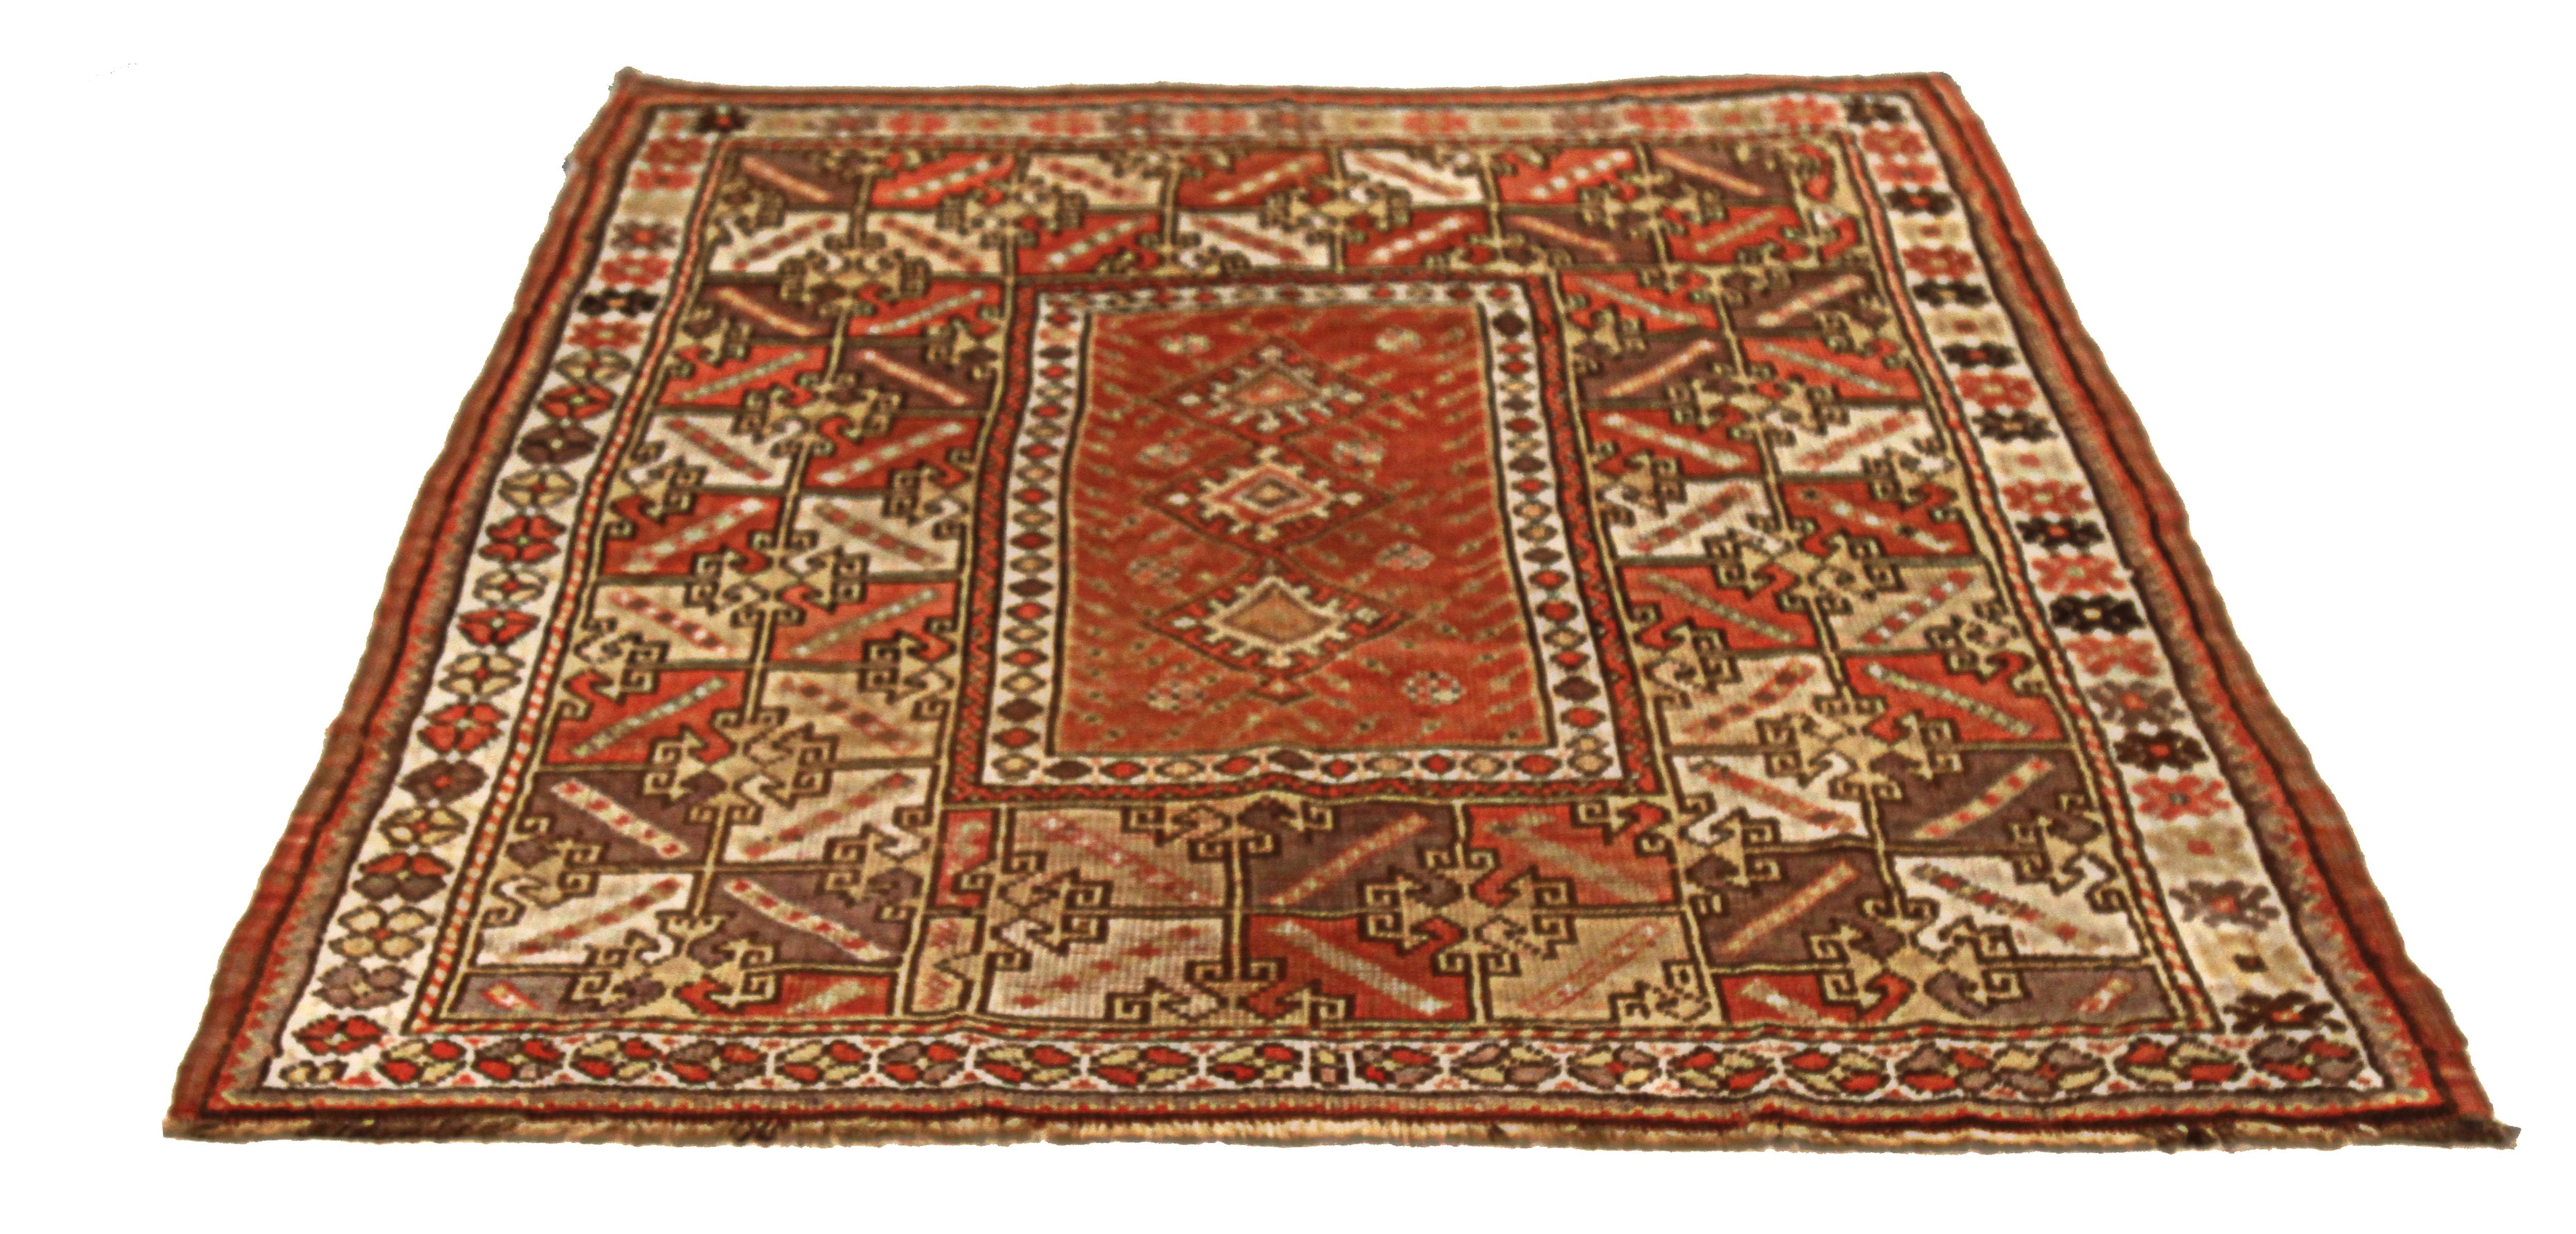 Modern 21st century hand-woven Turkish area rug made from fine wool and all-natural vegetable dyes that are safe for people and pets. This beautiful piece features a rich field of geometric and tribal details in various colors. 

This area rug has